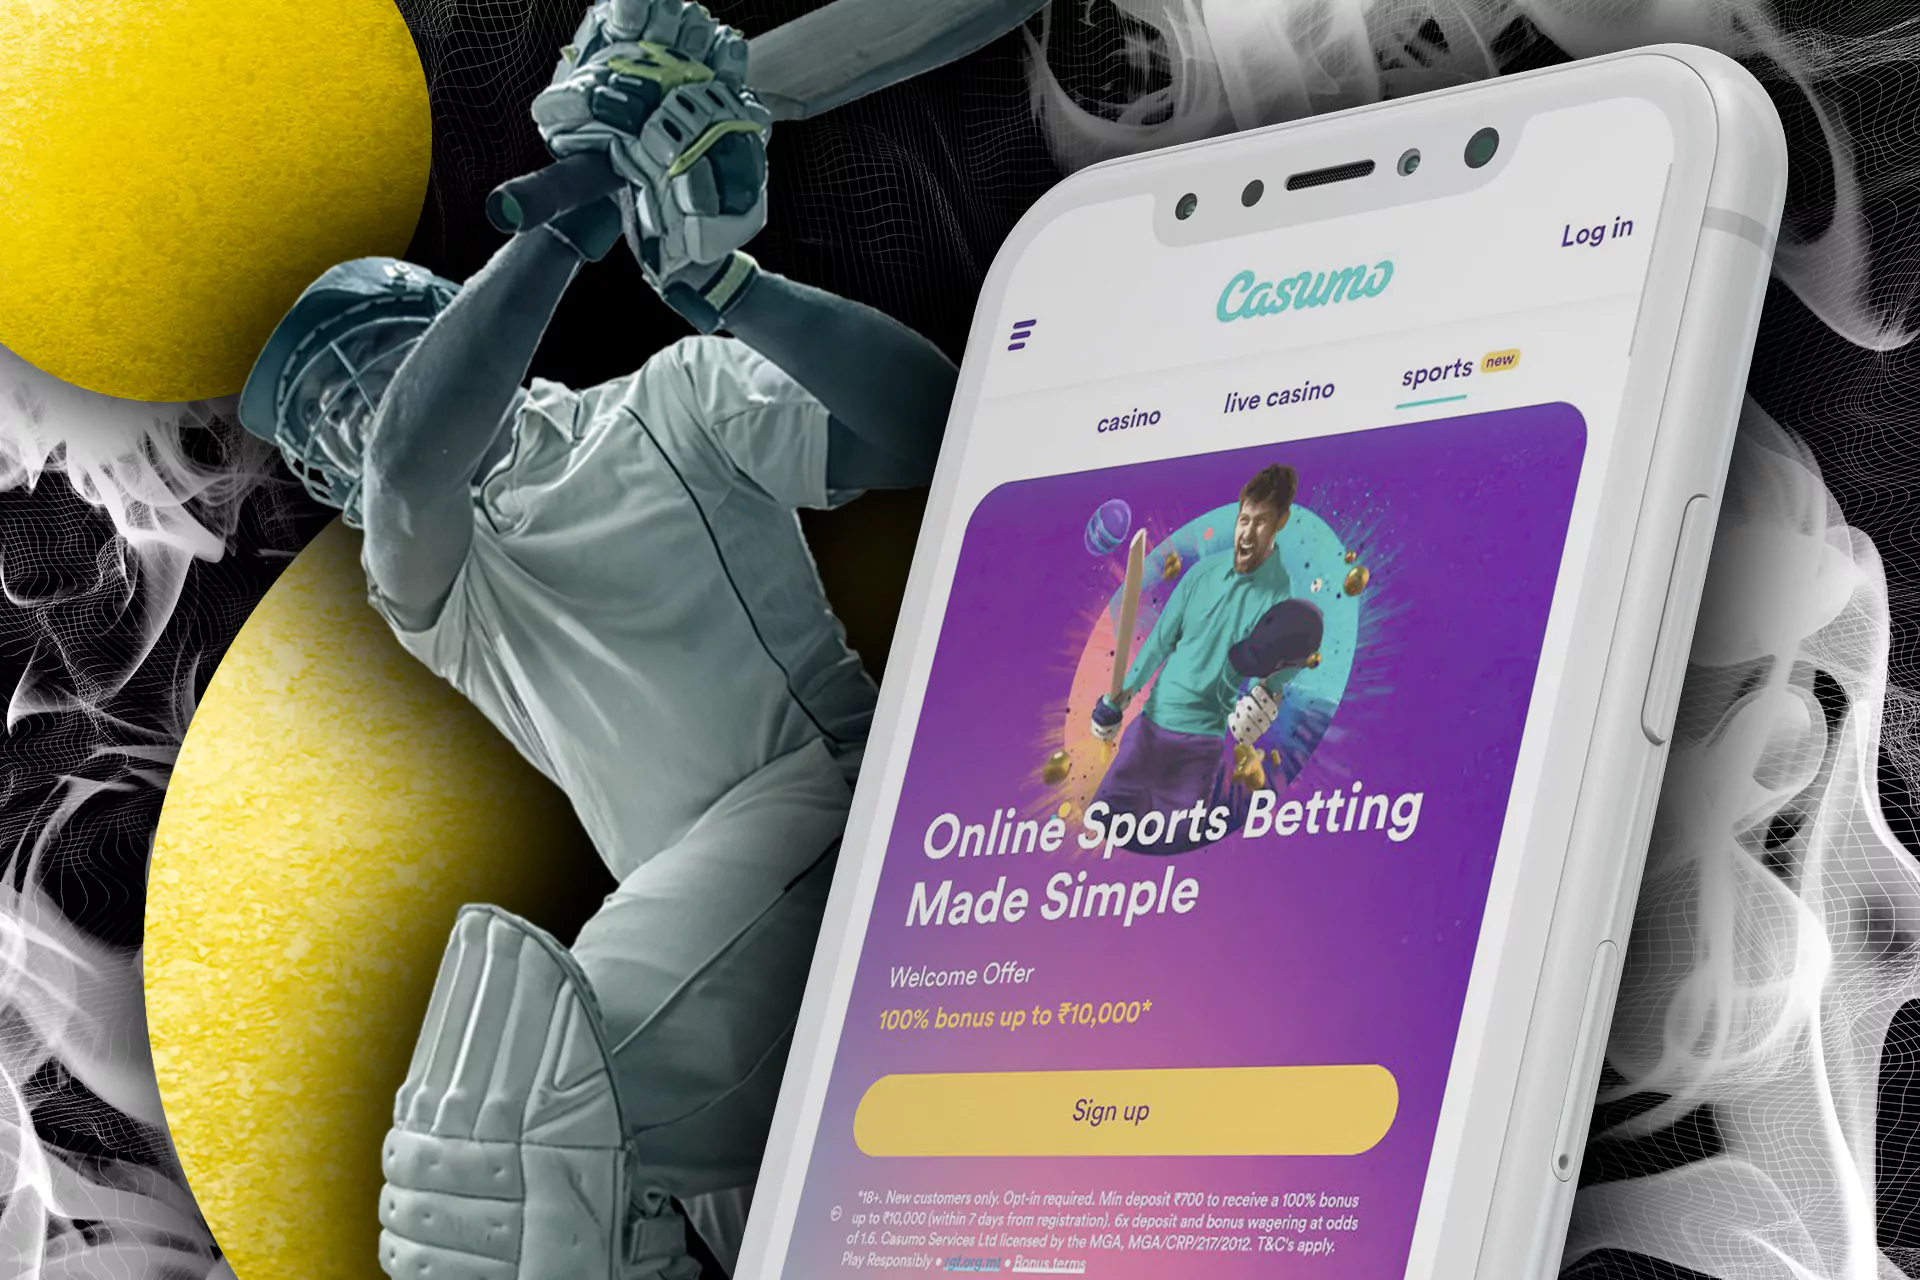 Casumo has has great environment for sports betting online through the app.